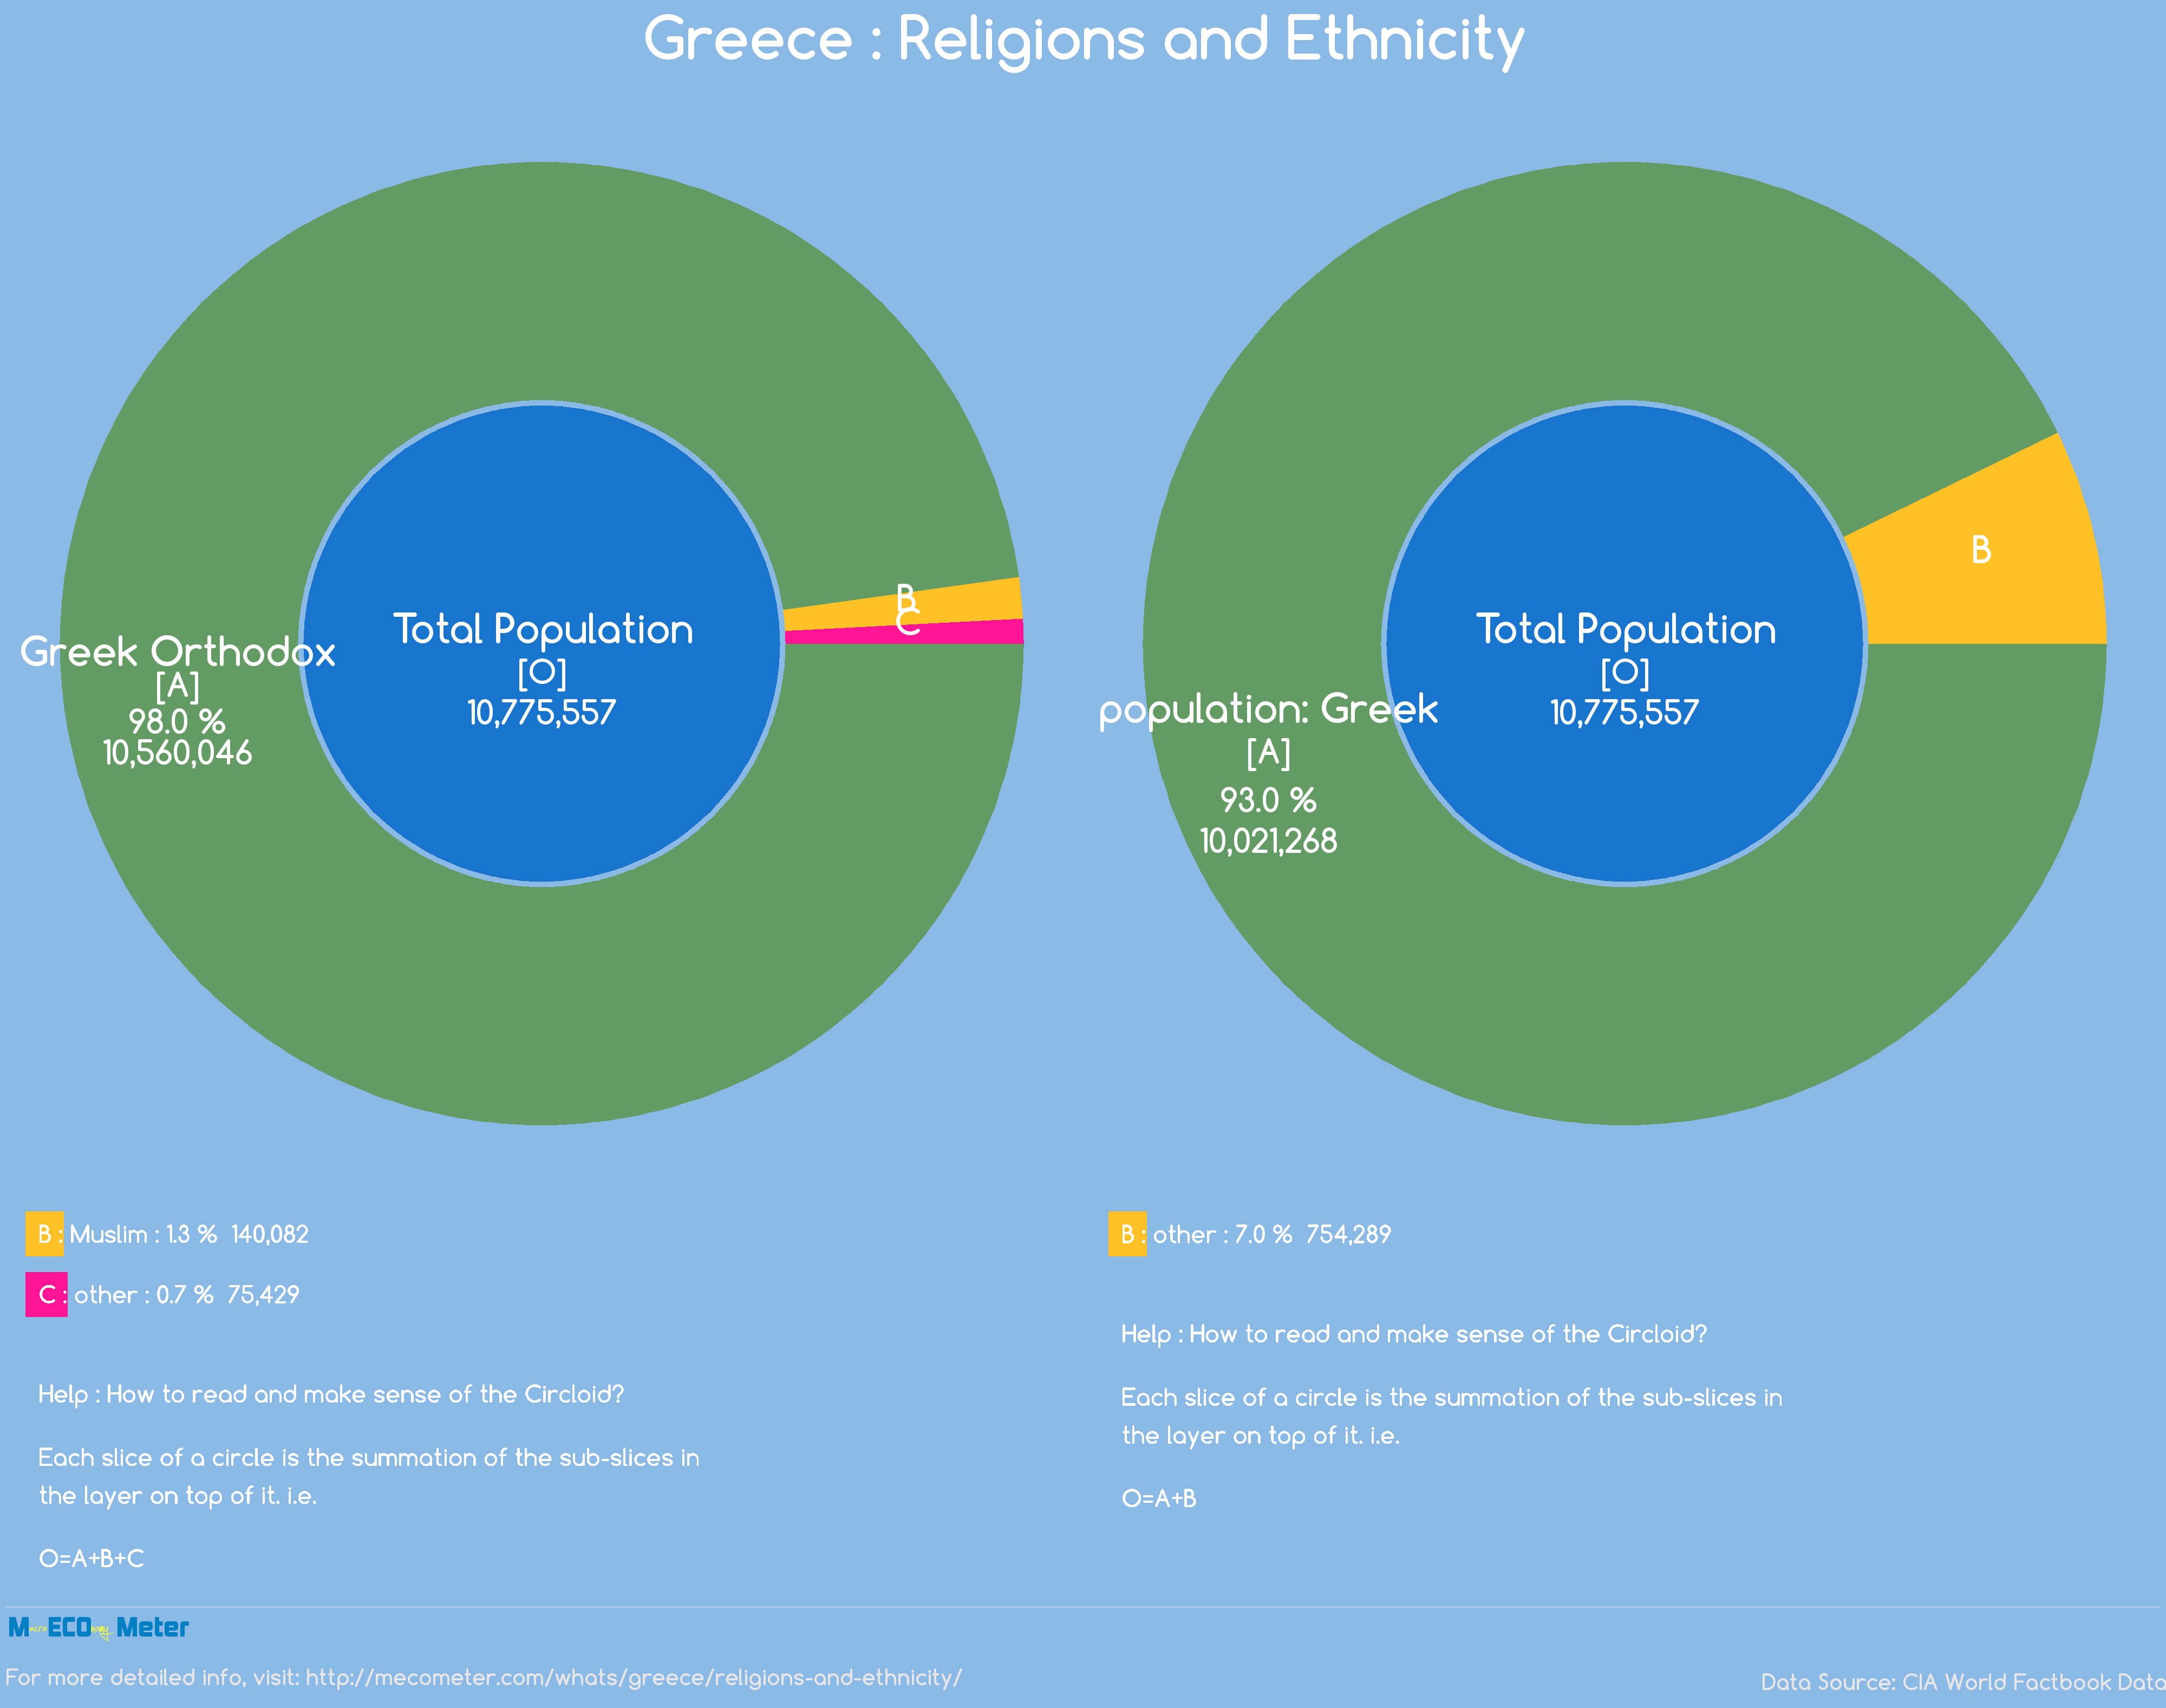 Greece : Religions and Ethnicity